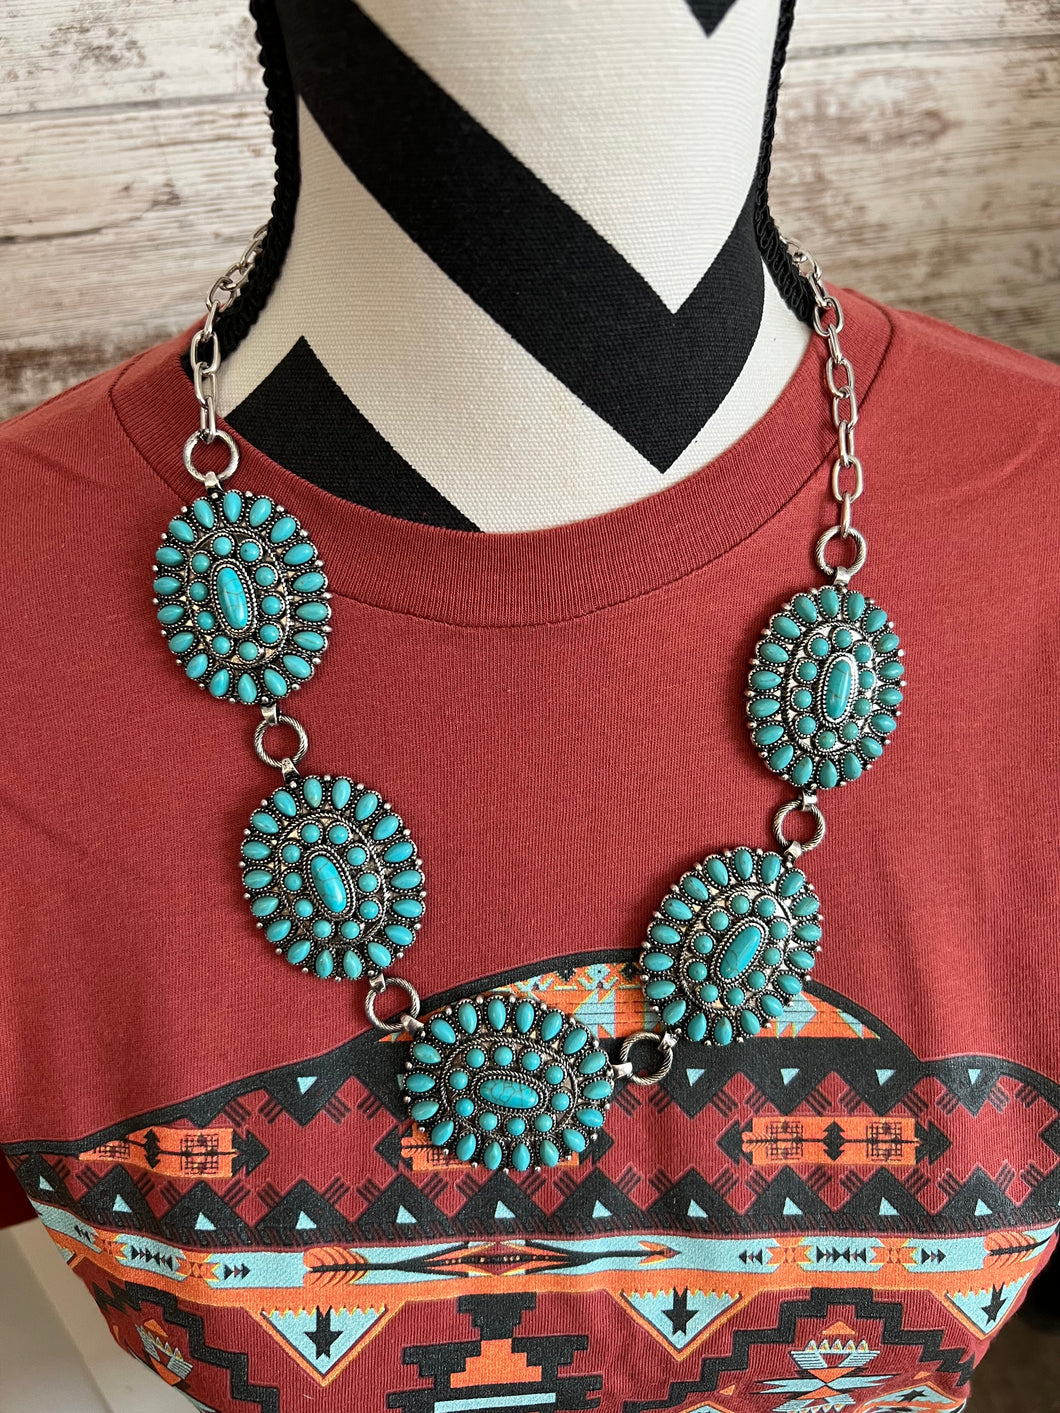 Turquoise cluster necklace